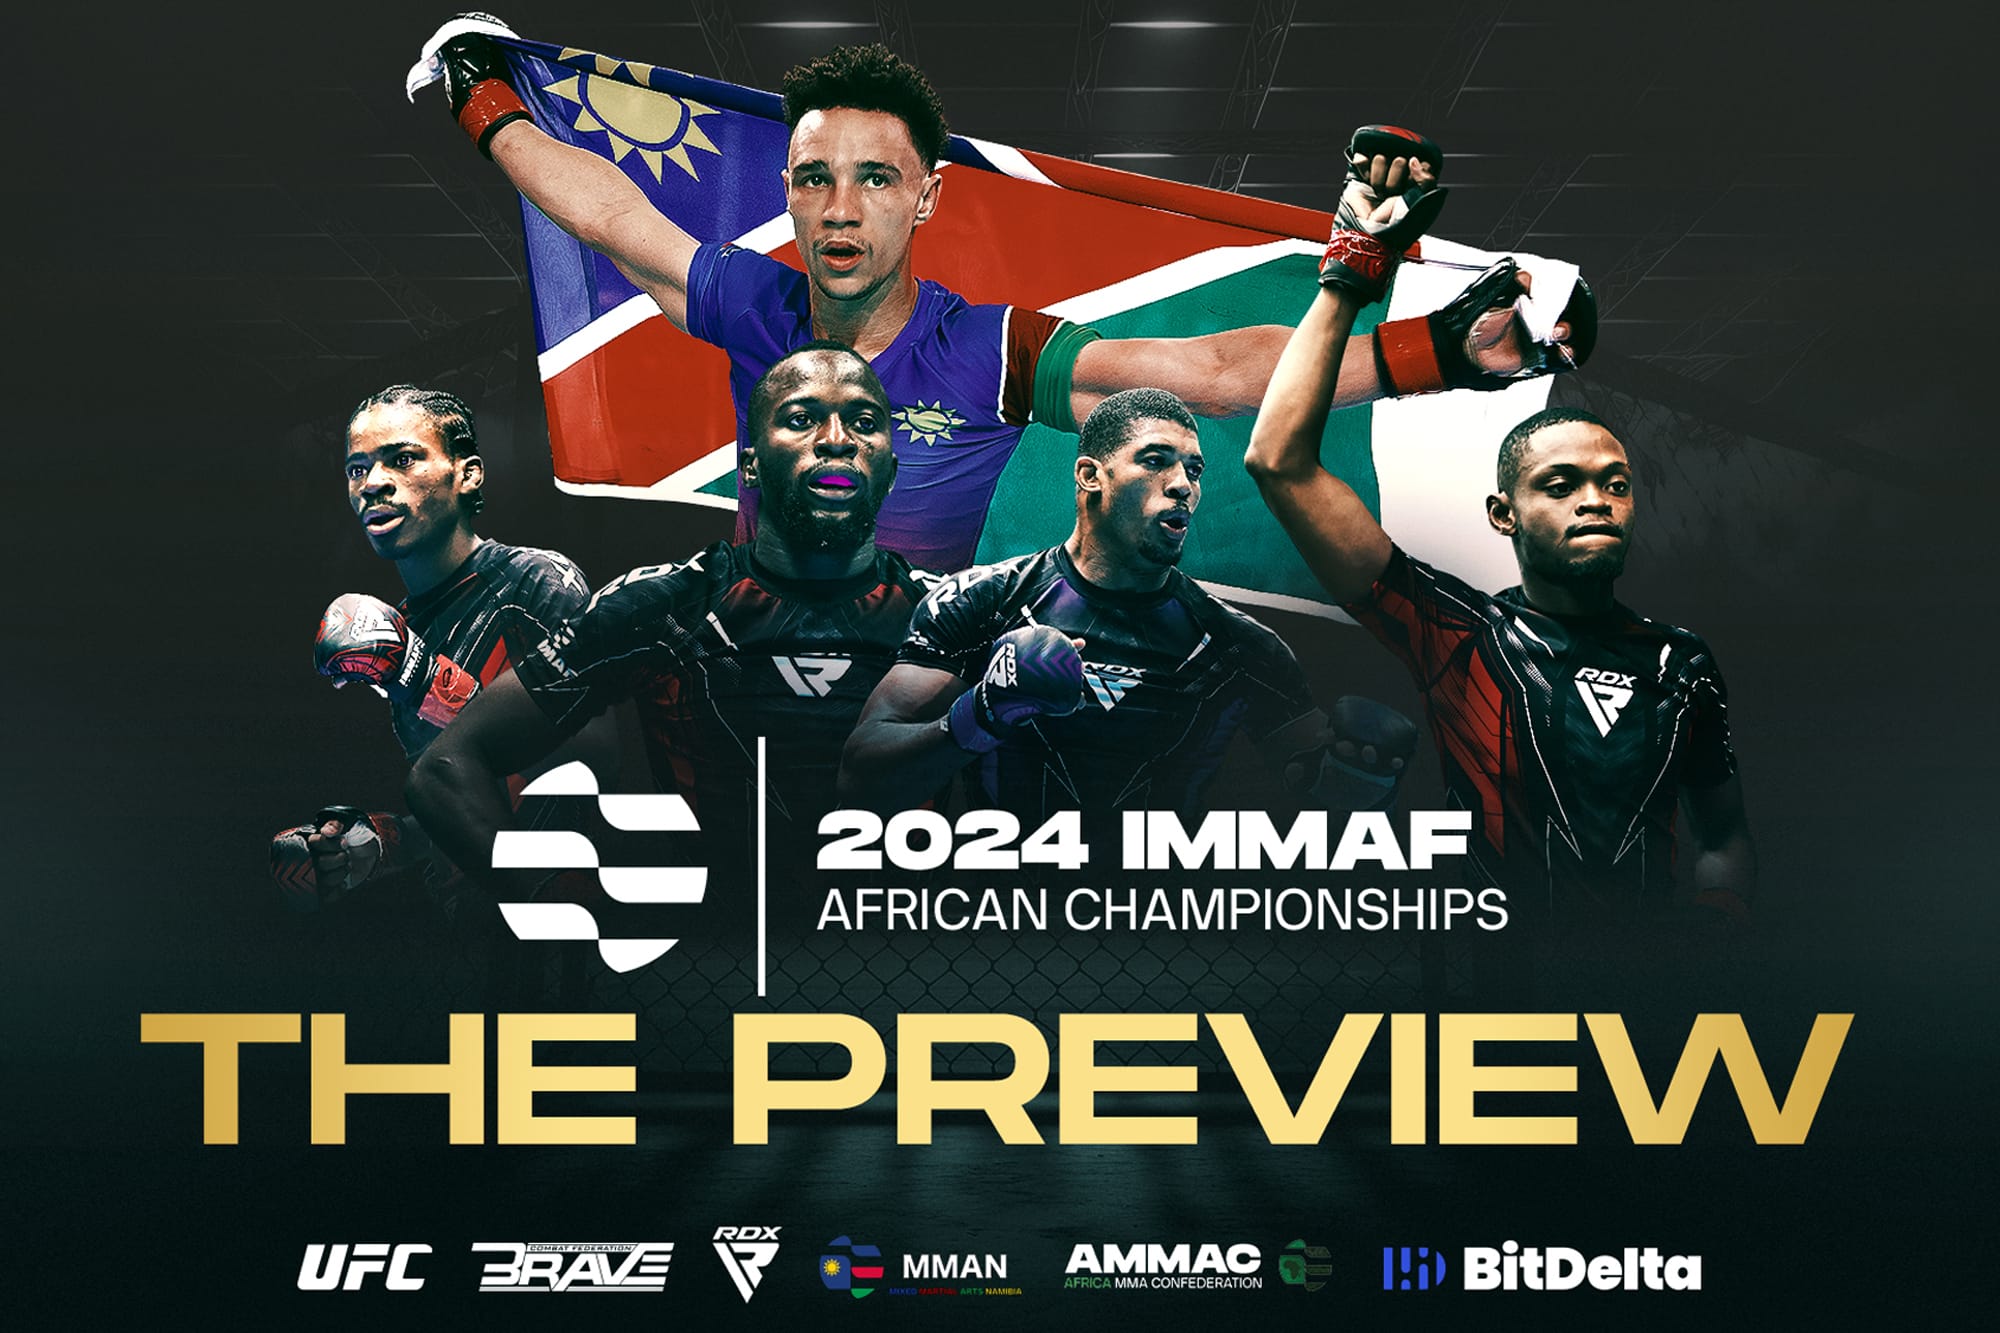 2024 IMMAF African Championships – THE PREVIEW